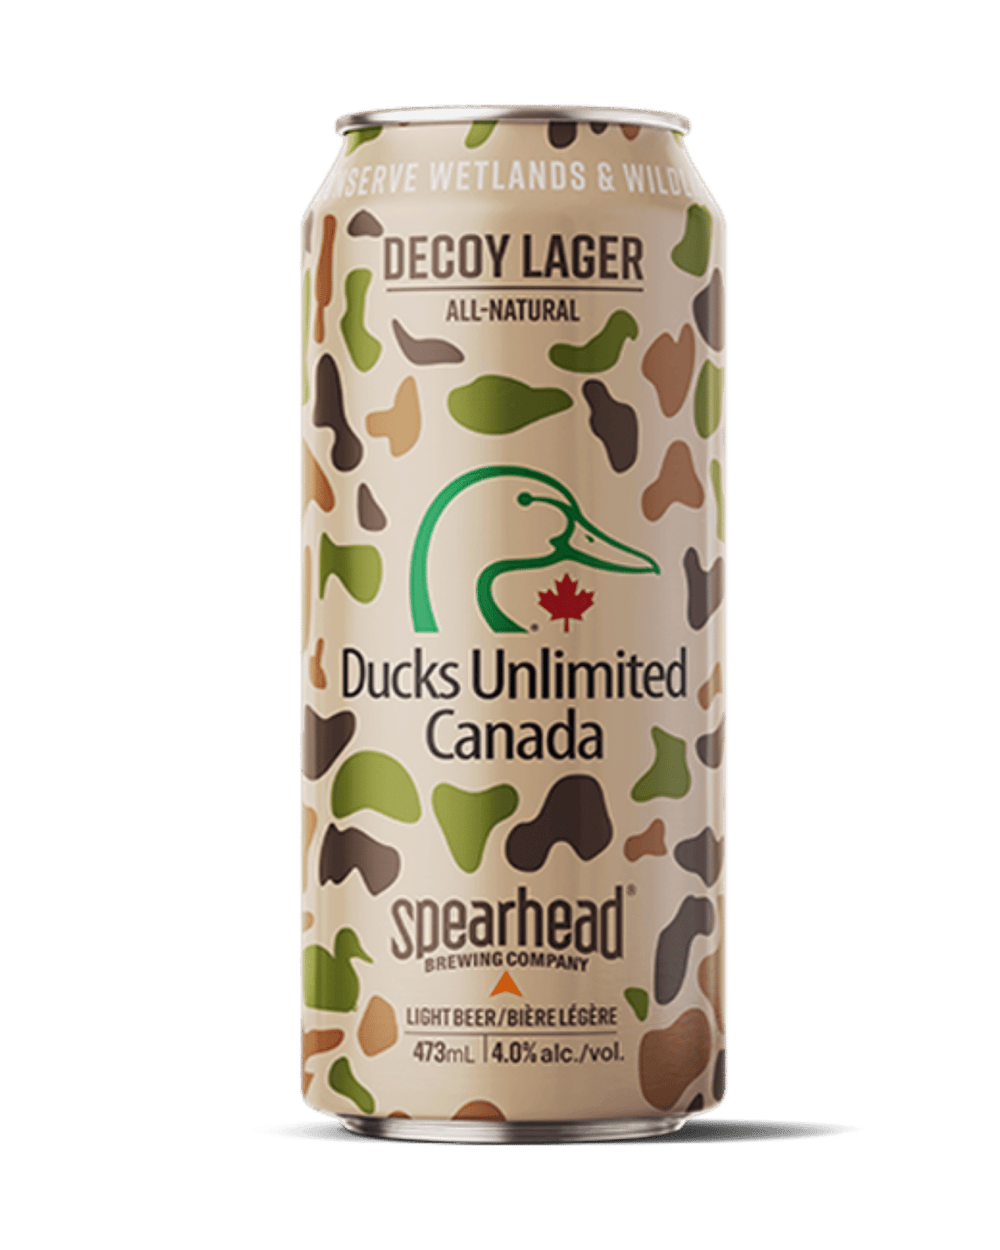 Decoy lager - Single can 6 pack price